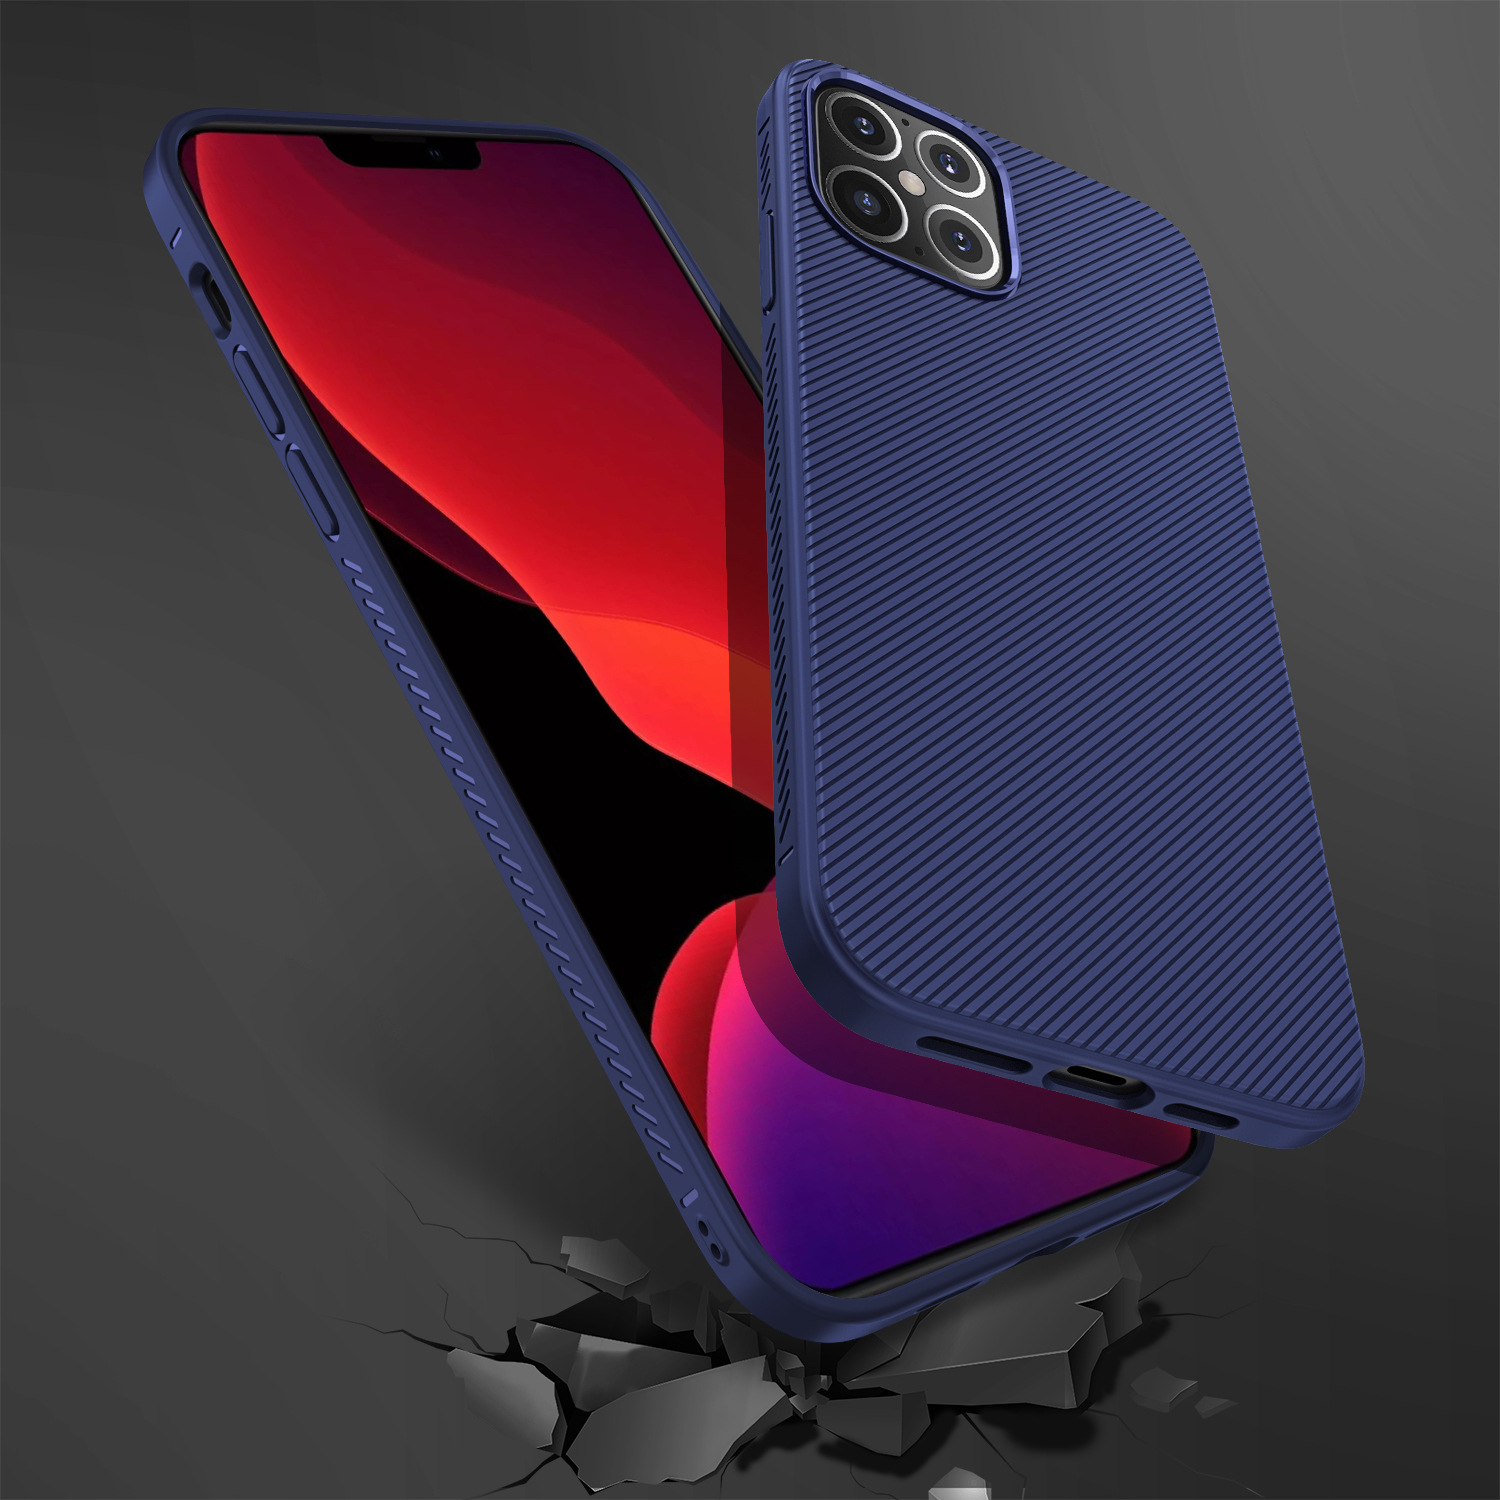 Bakeey-for-iPhone-12-Pro-Max-67-inch-Case-Carbon-Fiber-Texture-Slim-Soft-Silicone-Shockproof-Protect-1761529-4